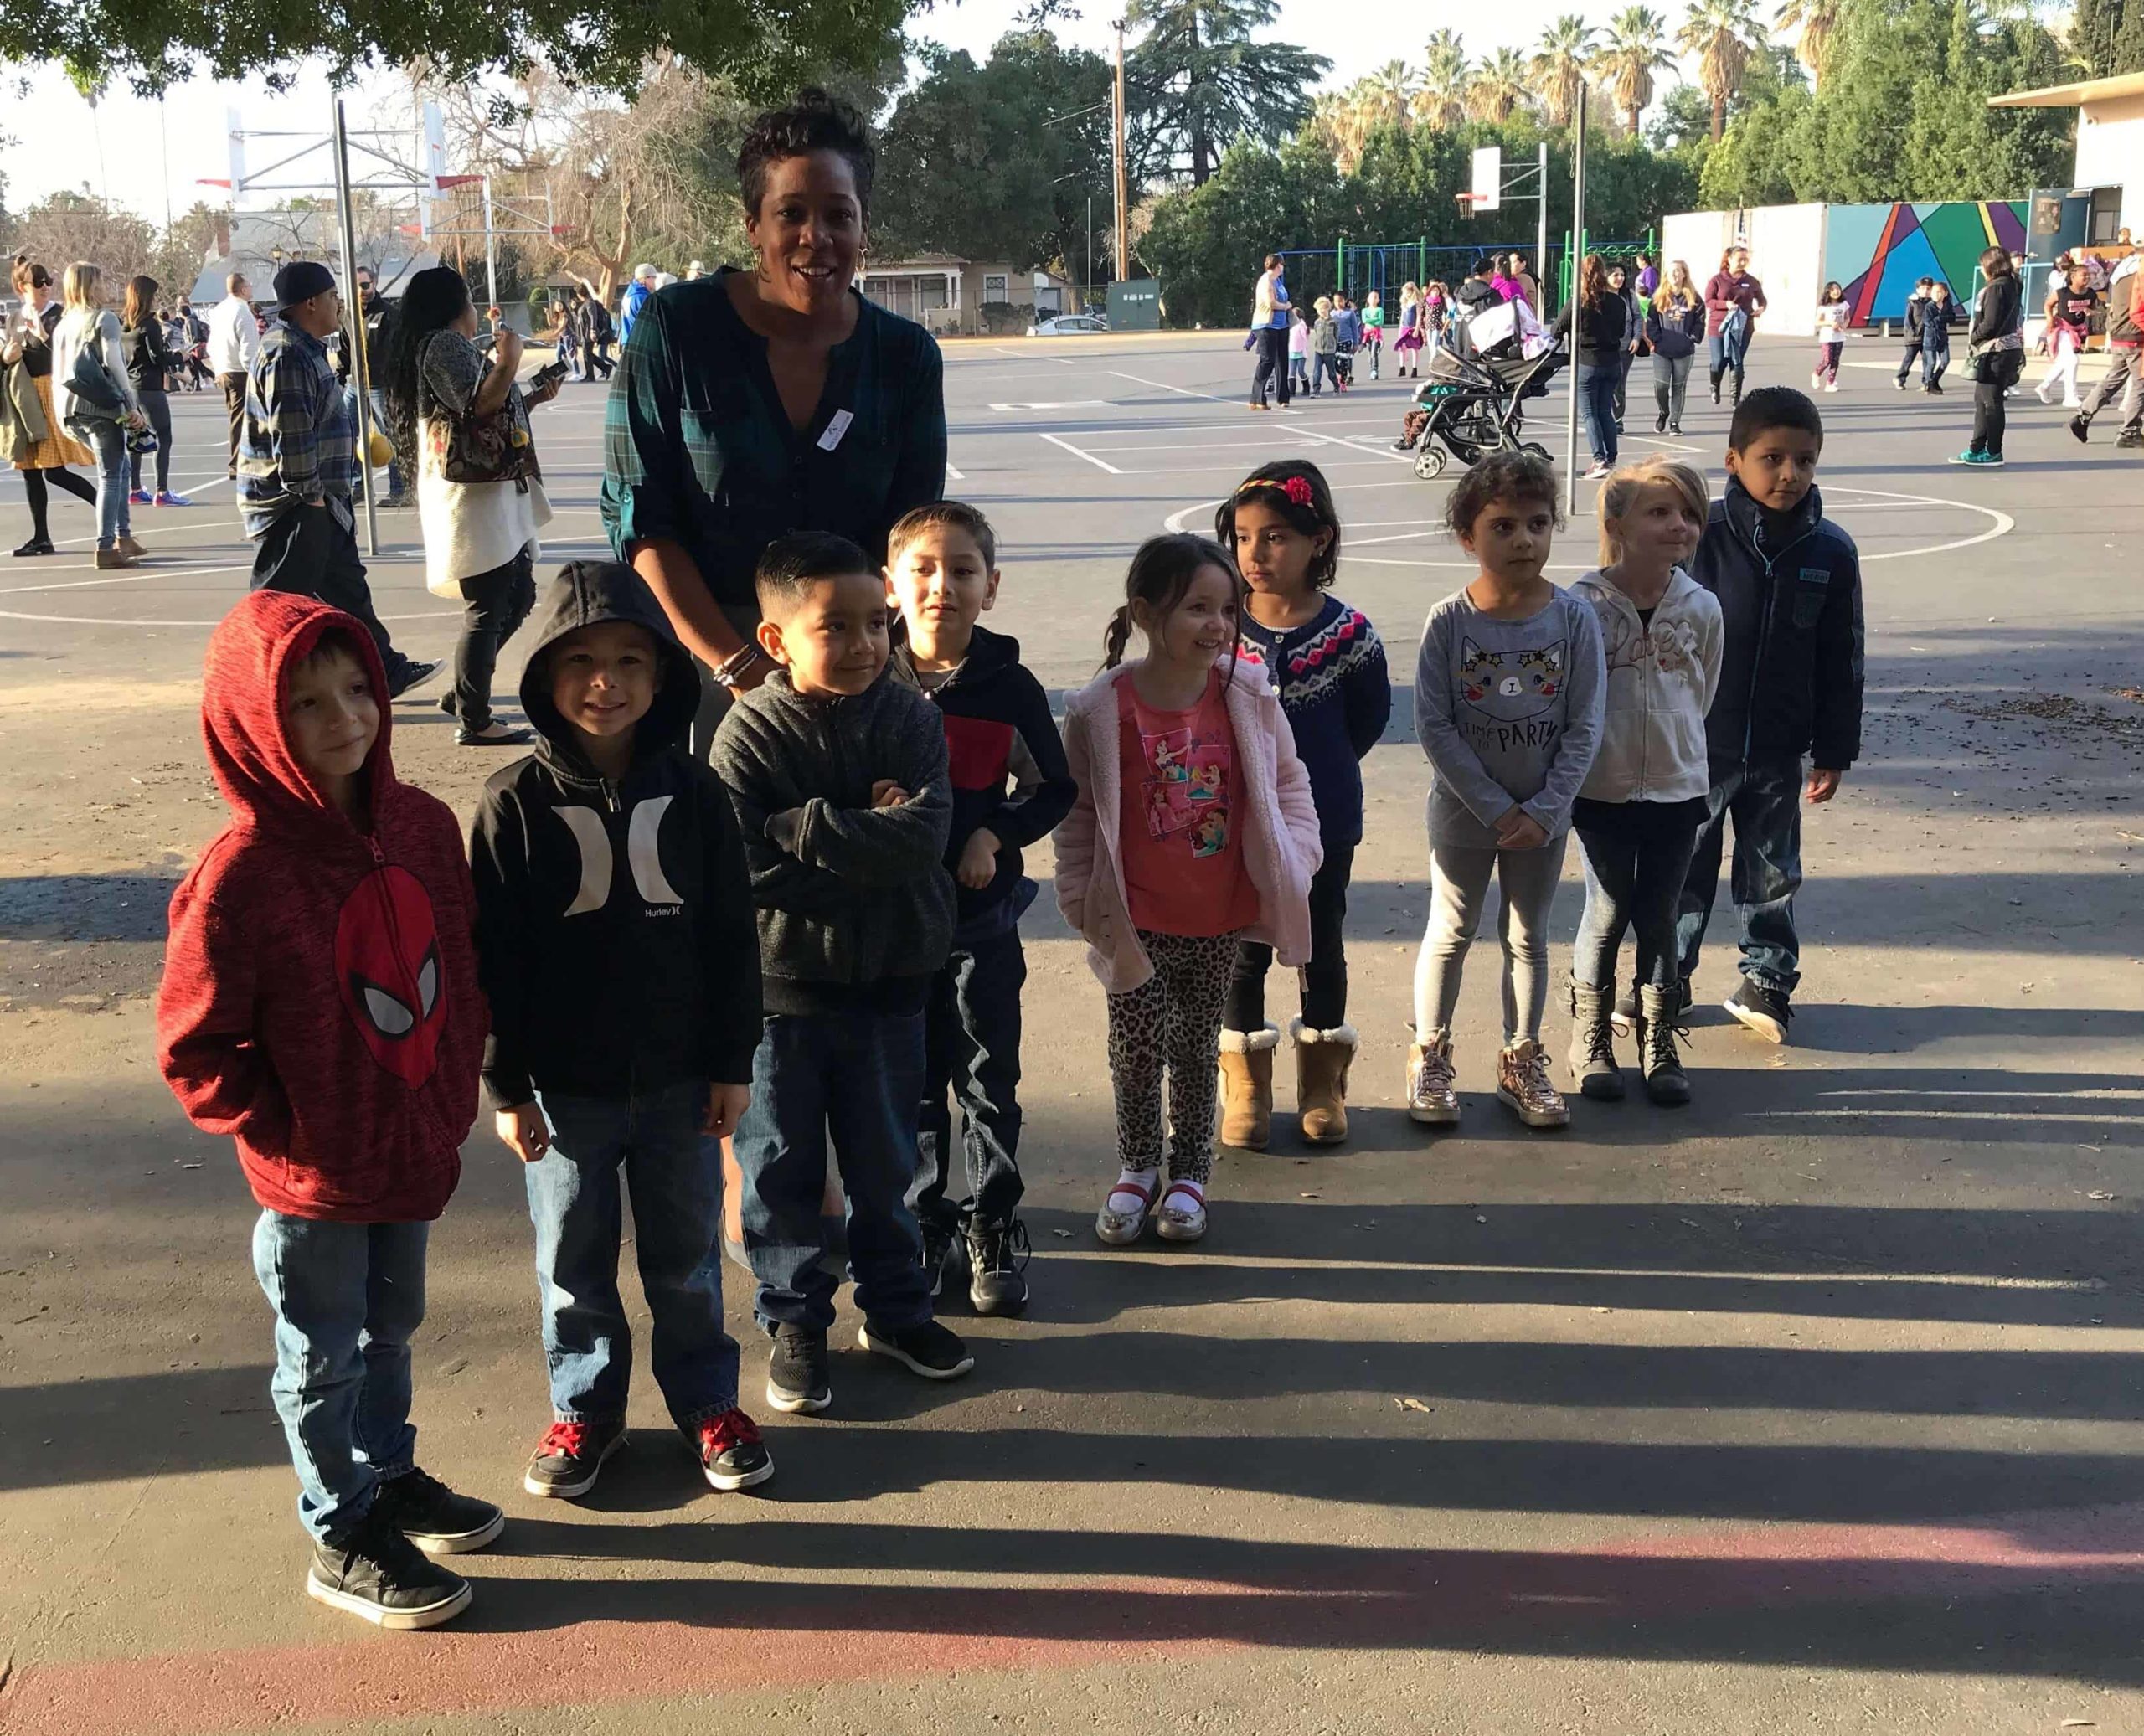 Rachel Etienne of Student Achievement Partners accompanied us on the tour. Here she is pictured with some kindergarteners after the Friday morning assembly.